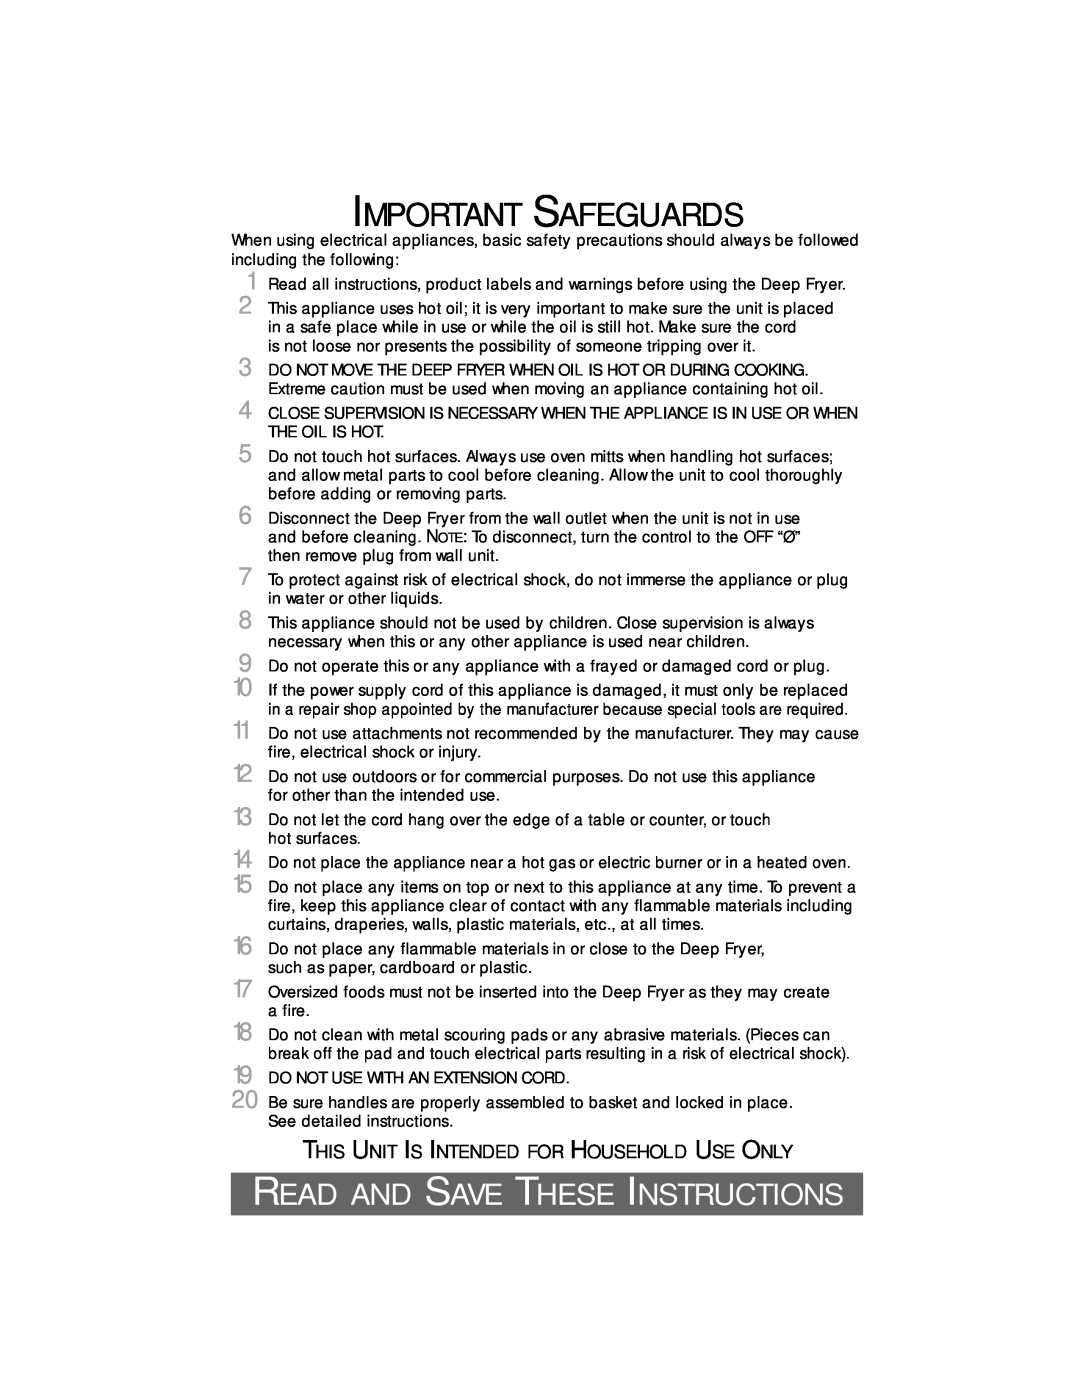 Sunbeam 3247 Important Safeguards, Read And Save These Instructions, 9 10, This Unit Is Intended For Household Use Only 